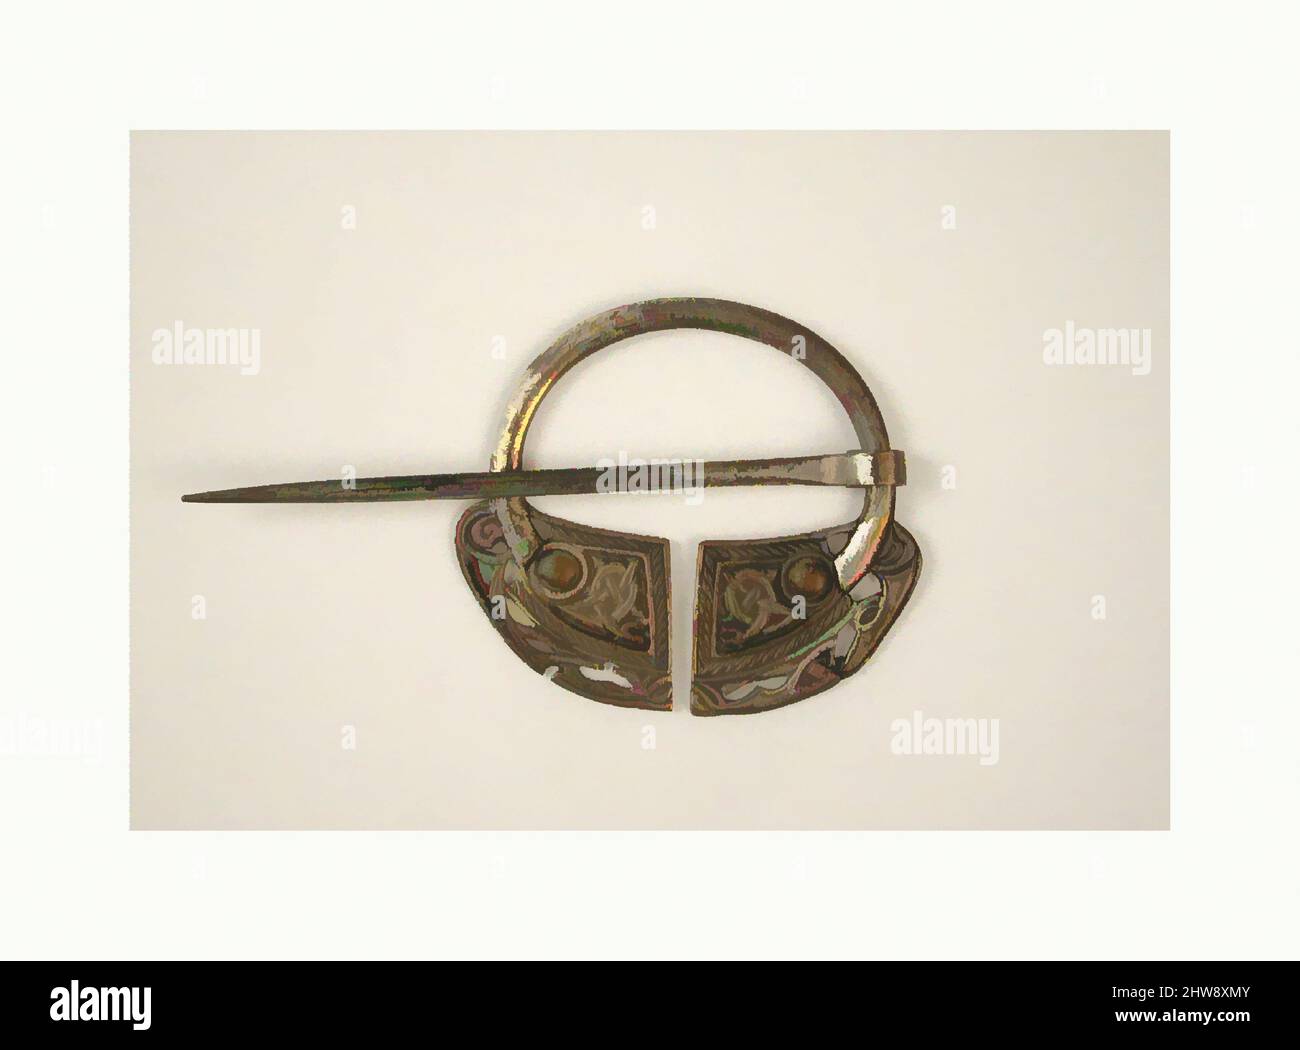 Art inspired by Celtic Brooch, early 20th century (original dated 8th–11th century), Irish, Silver, Diam: 2 1/2 in. (6.4 cm) L.(Pin): 4 in. (10.2 cm) Depth: 1/8 in. (0.3 cm), Reproductions-Metalwork, Classic works modernized by Artotop with a splash of modernity. Shapes, color and value, eye-catching visual impact on art. Emotions through freedom of artworks in a contemporary way. A timeless message pursuing a wildly creative new direction. Artists turning to the digital medium and creating the Artotop NFT Stock Photo